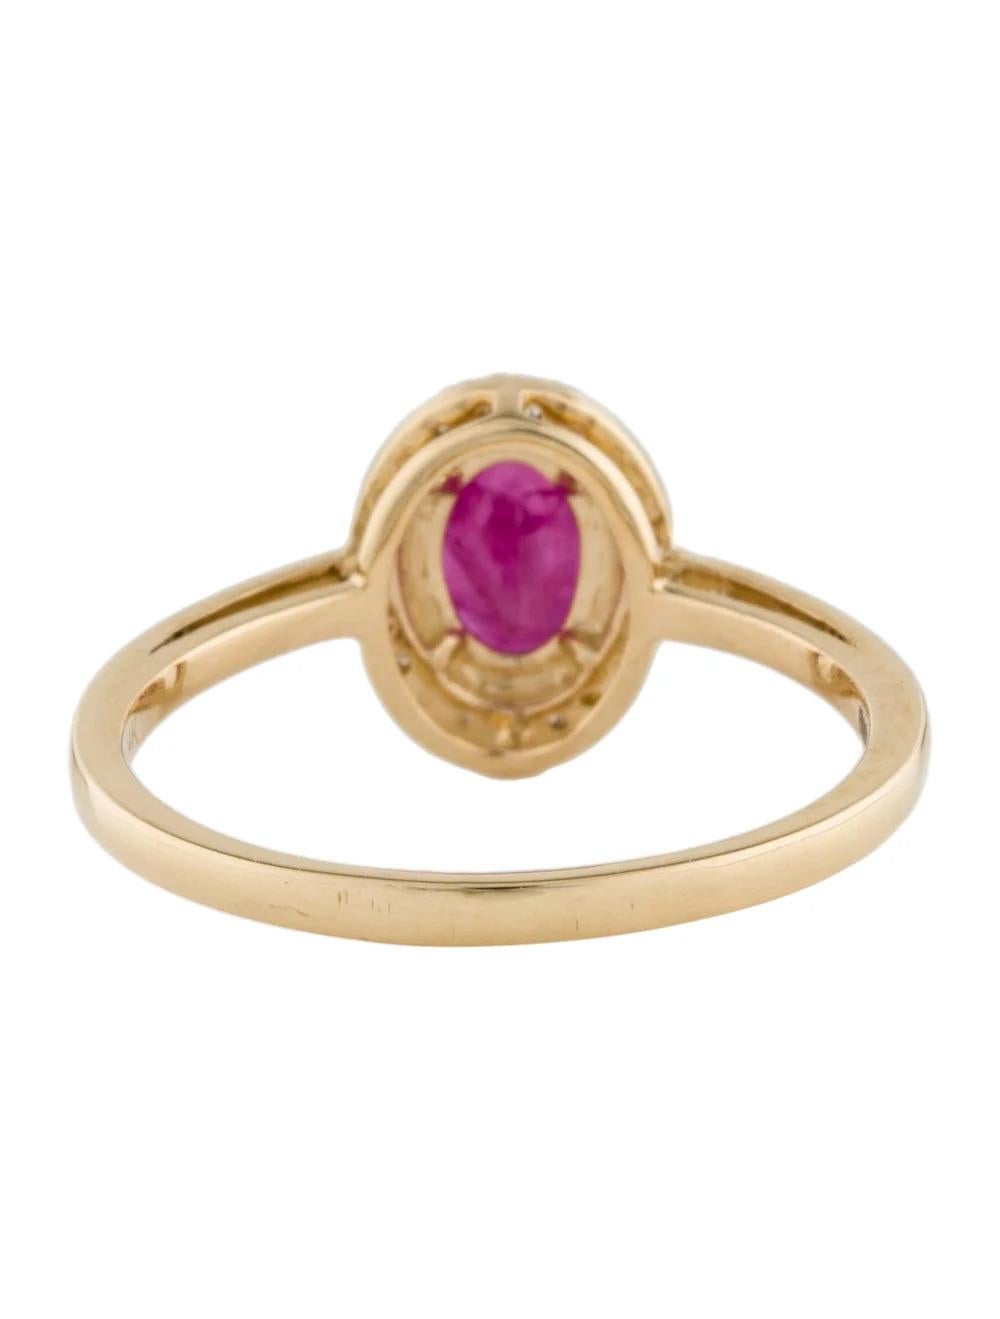 14K Ruby & Diamond Cocktail Ring, Size 7 - Vintage Style, Statement Jewelry In New Condition For Sale In Holtsville, NY